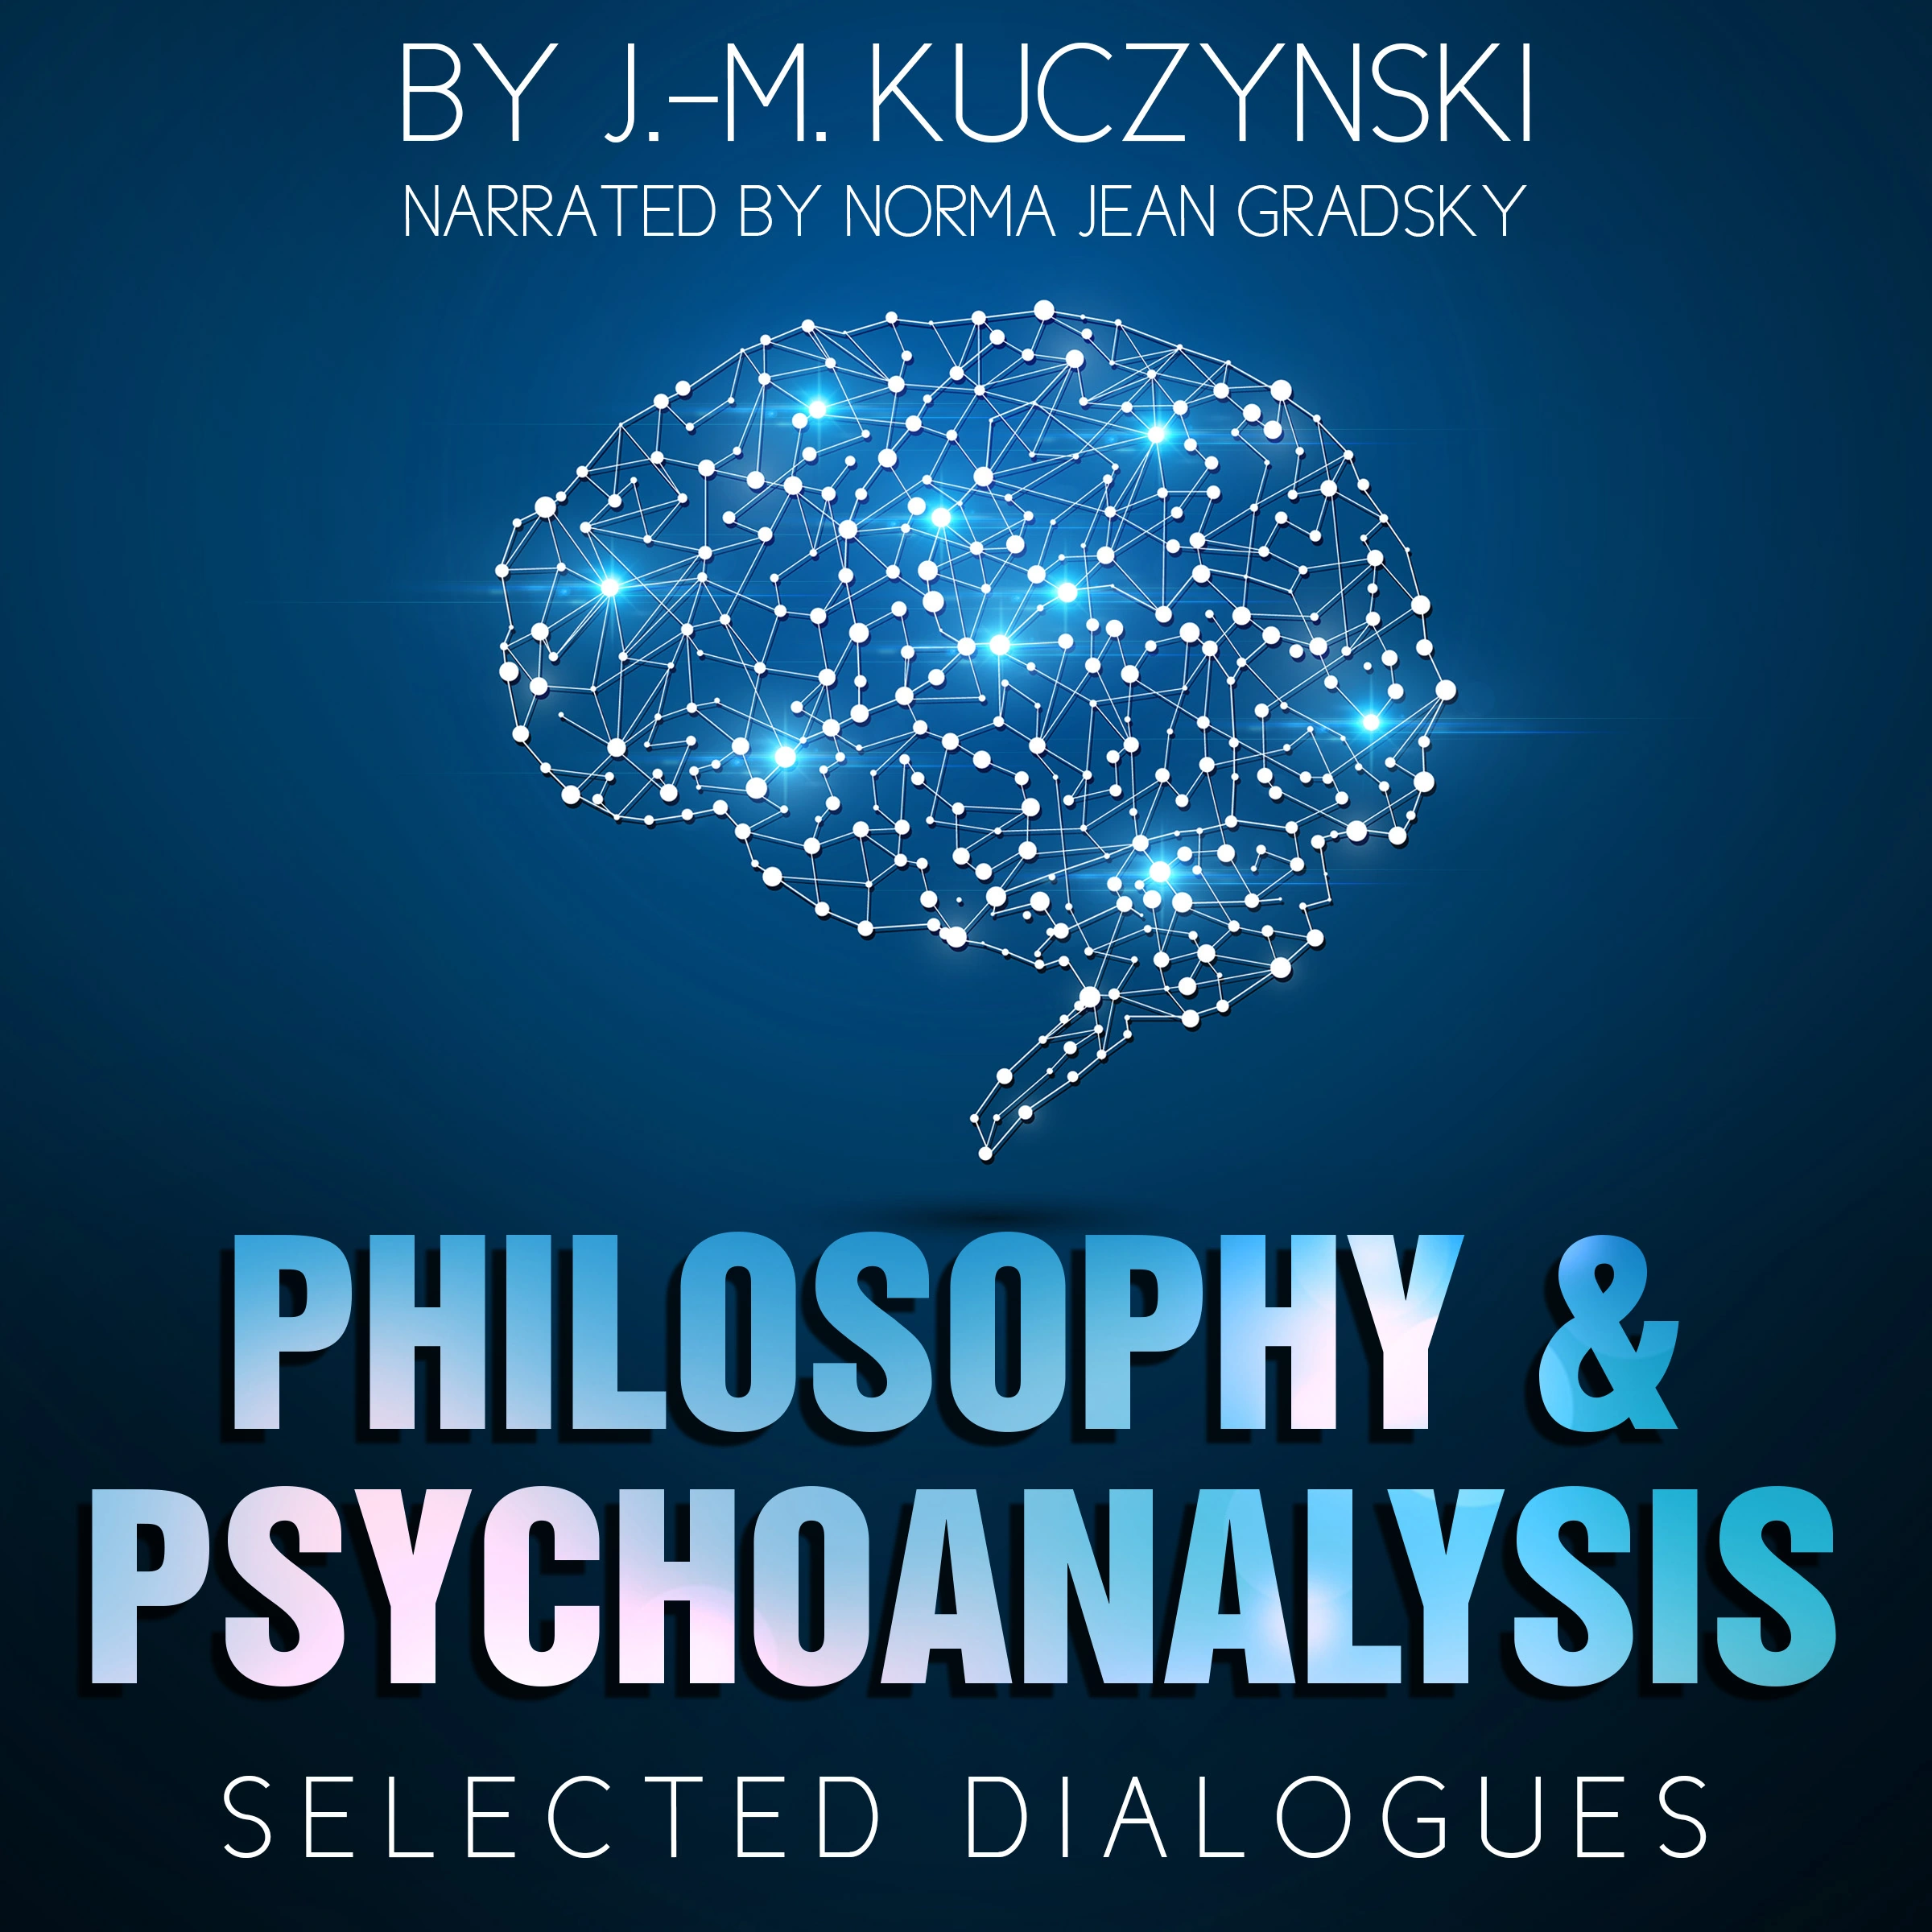 Philosophy and Psychoanalysis: Selected Dialogues Audiobook by J.-M. Kuczynski